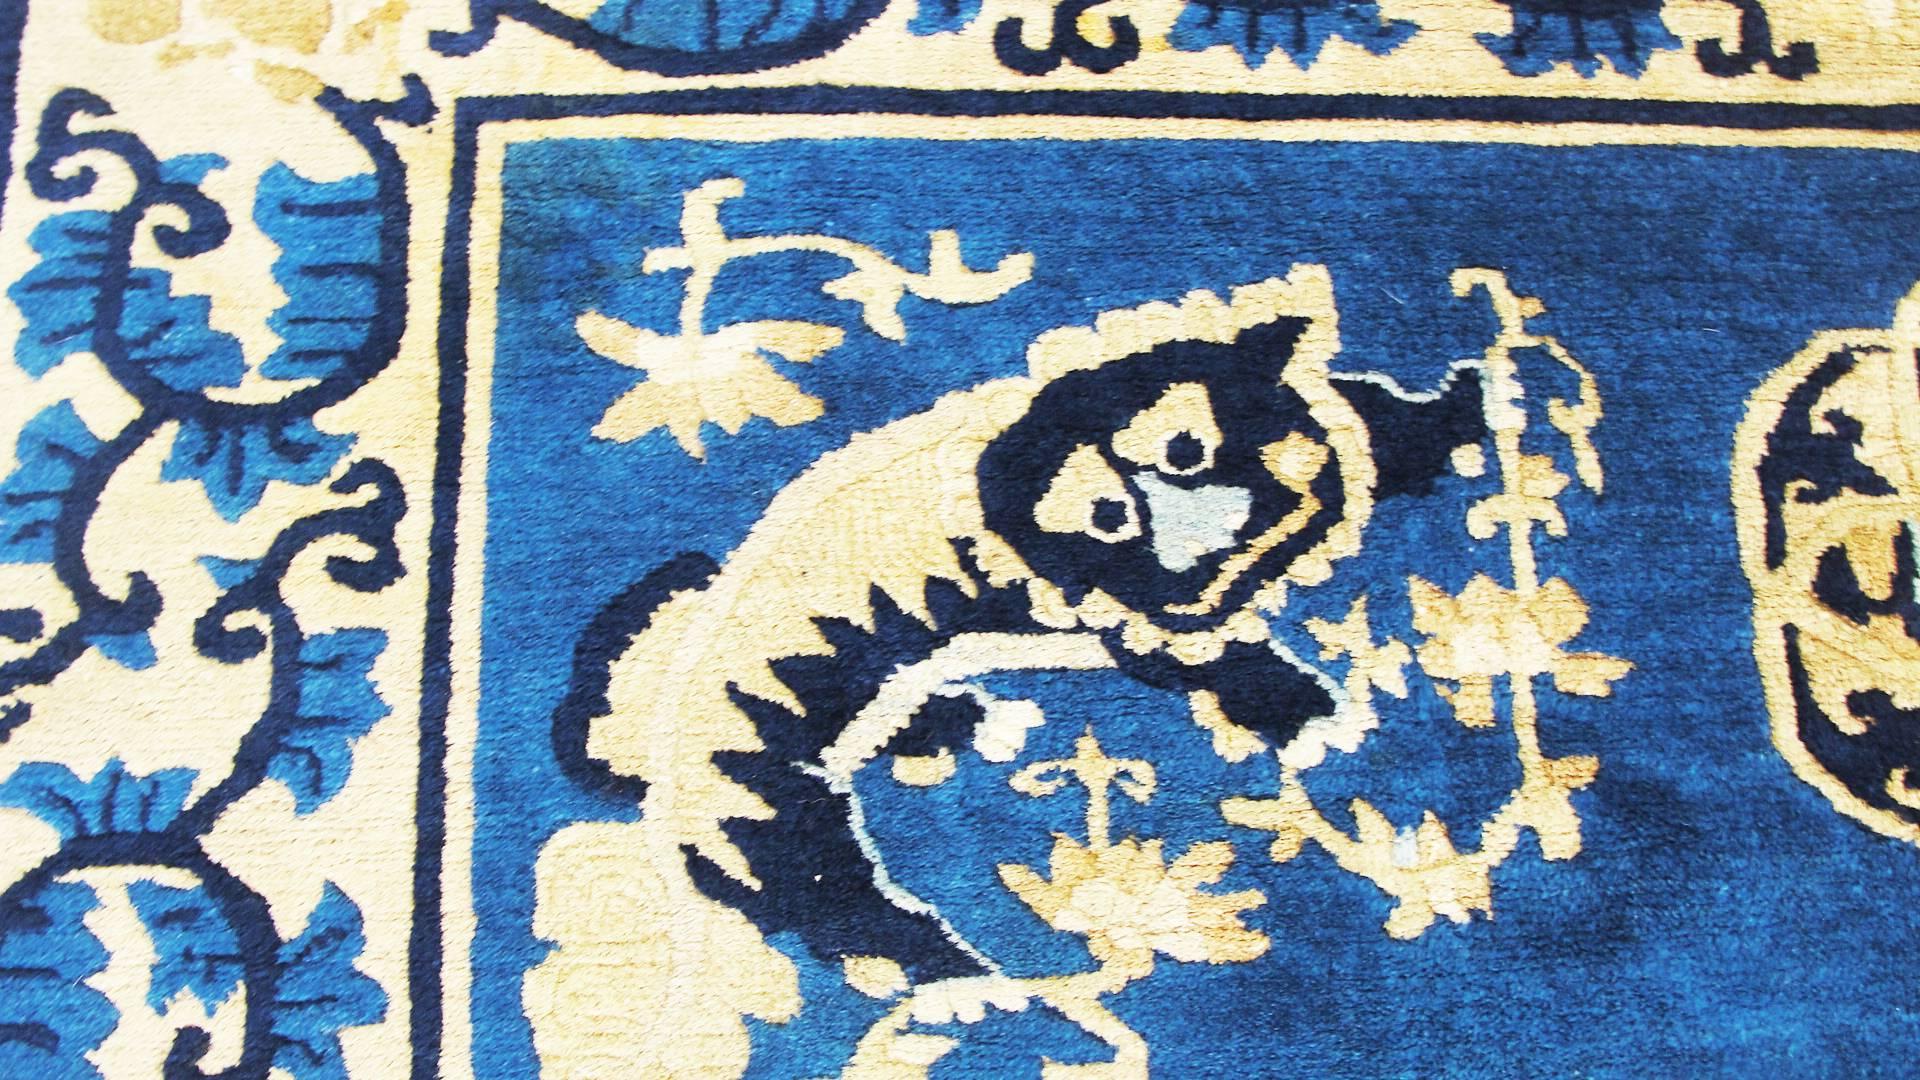  Antique Art Deco Chinese Peking Dragon Carpet In Excellent Condition For Sale In Evanston, IL